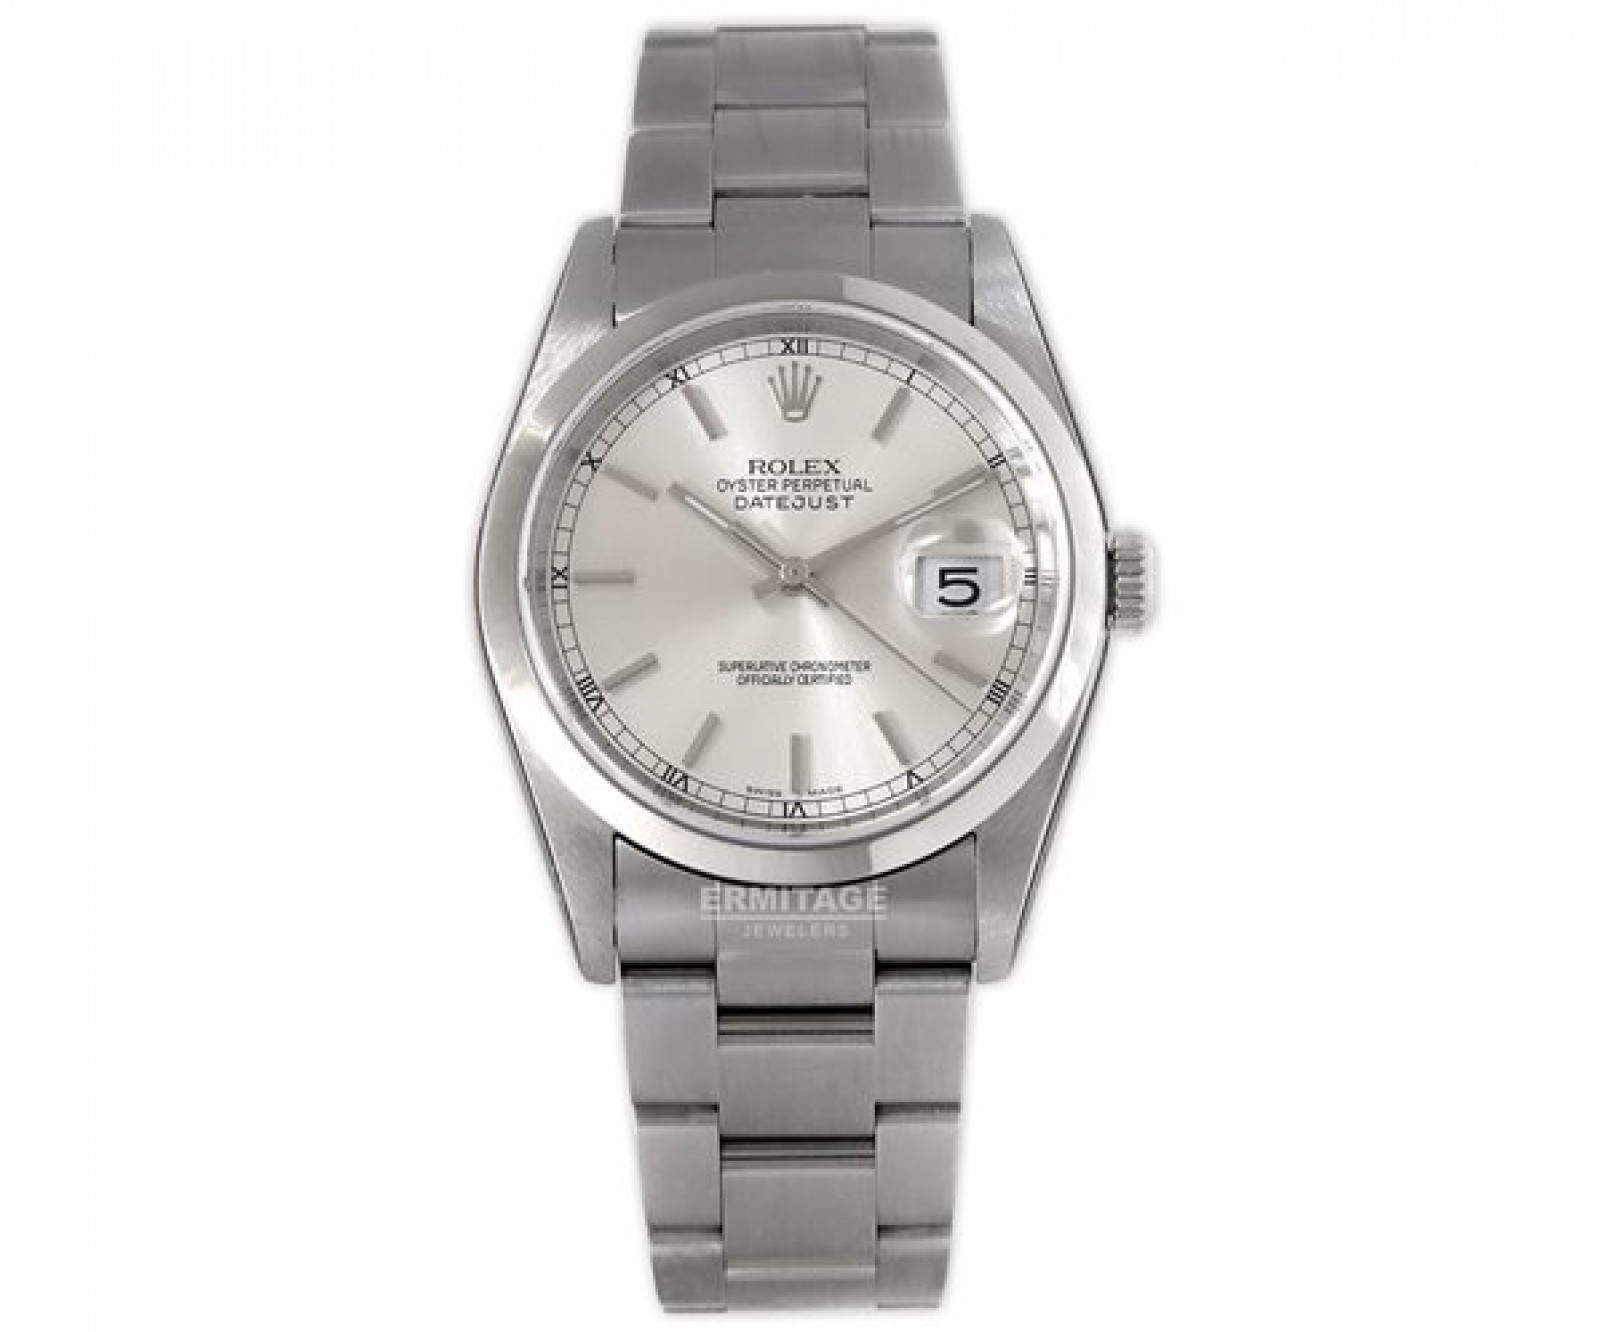 Sell Rolex Datejust 16200 Stainless Steel